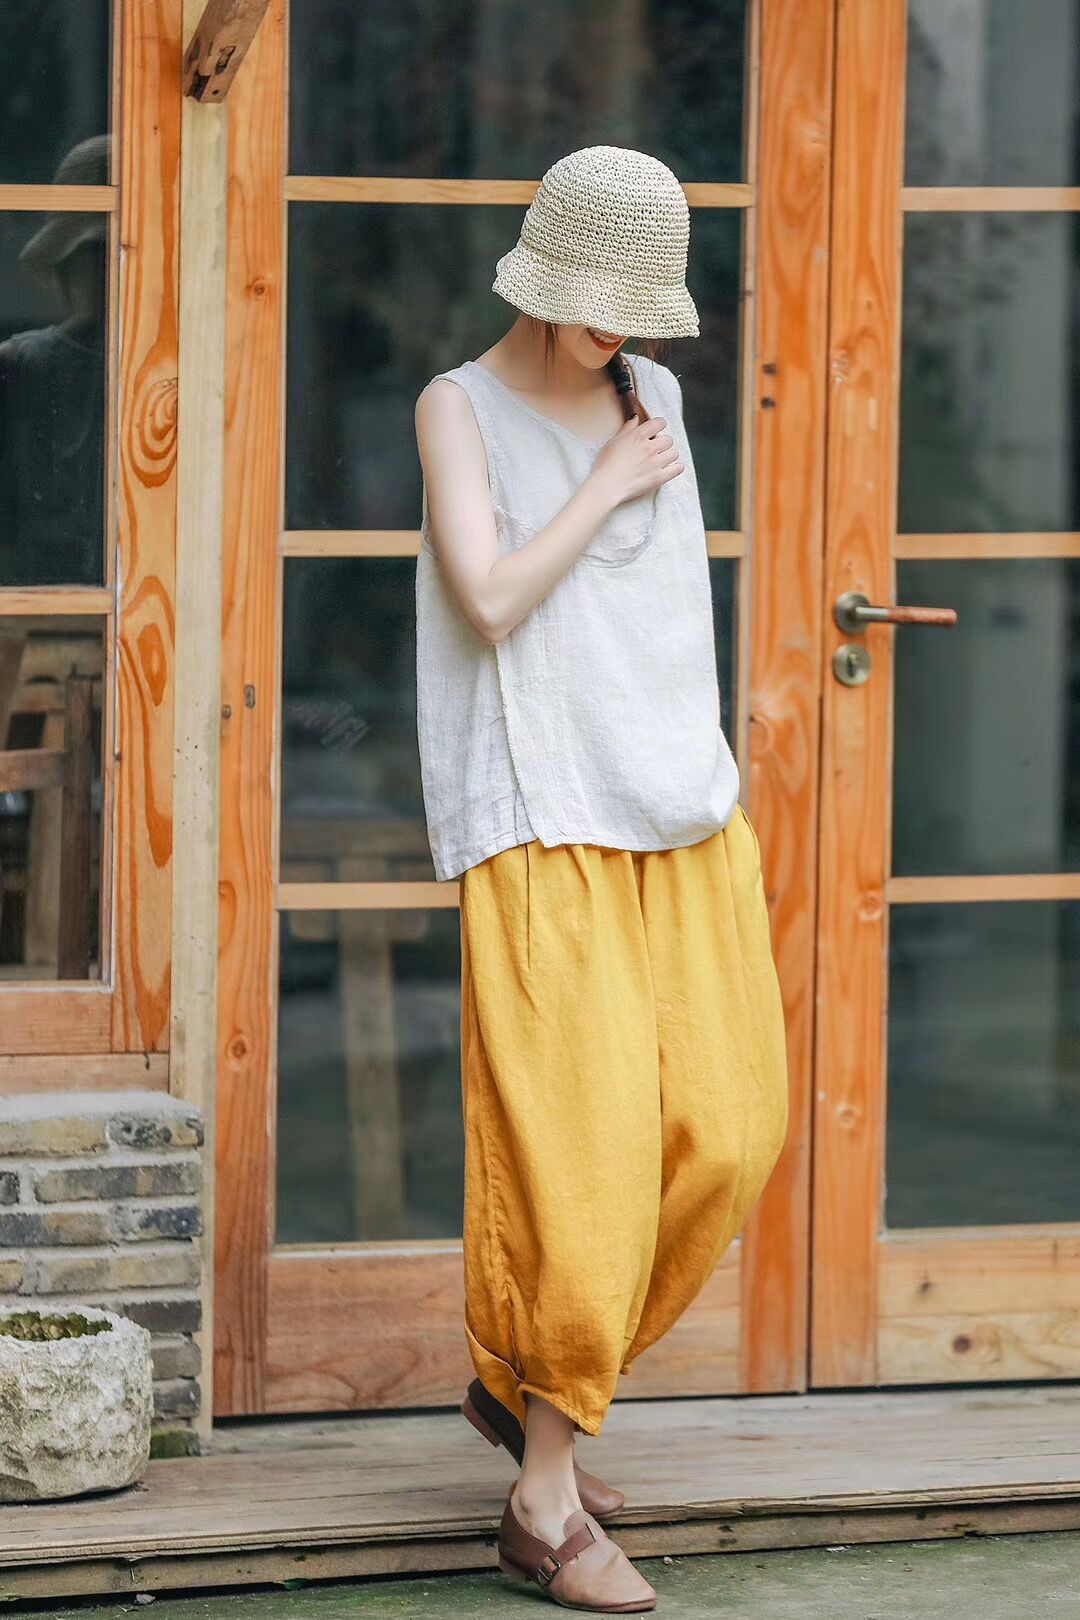 Ethnic Linen Elastic Waist Casual Pants for Women-Pants-White-One Size 45-65kg-Free Shipping Leatheretro